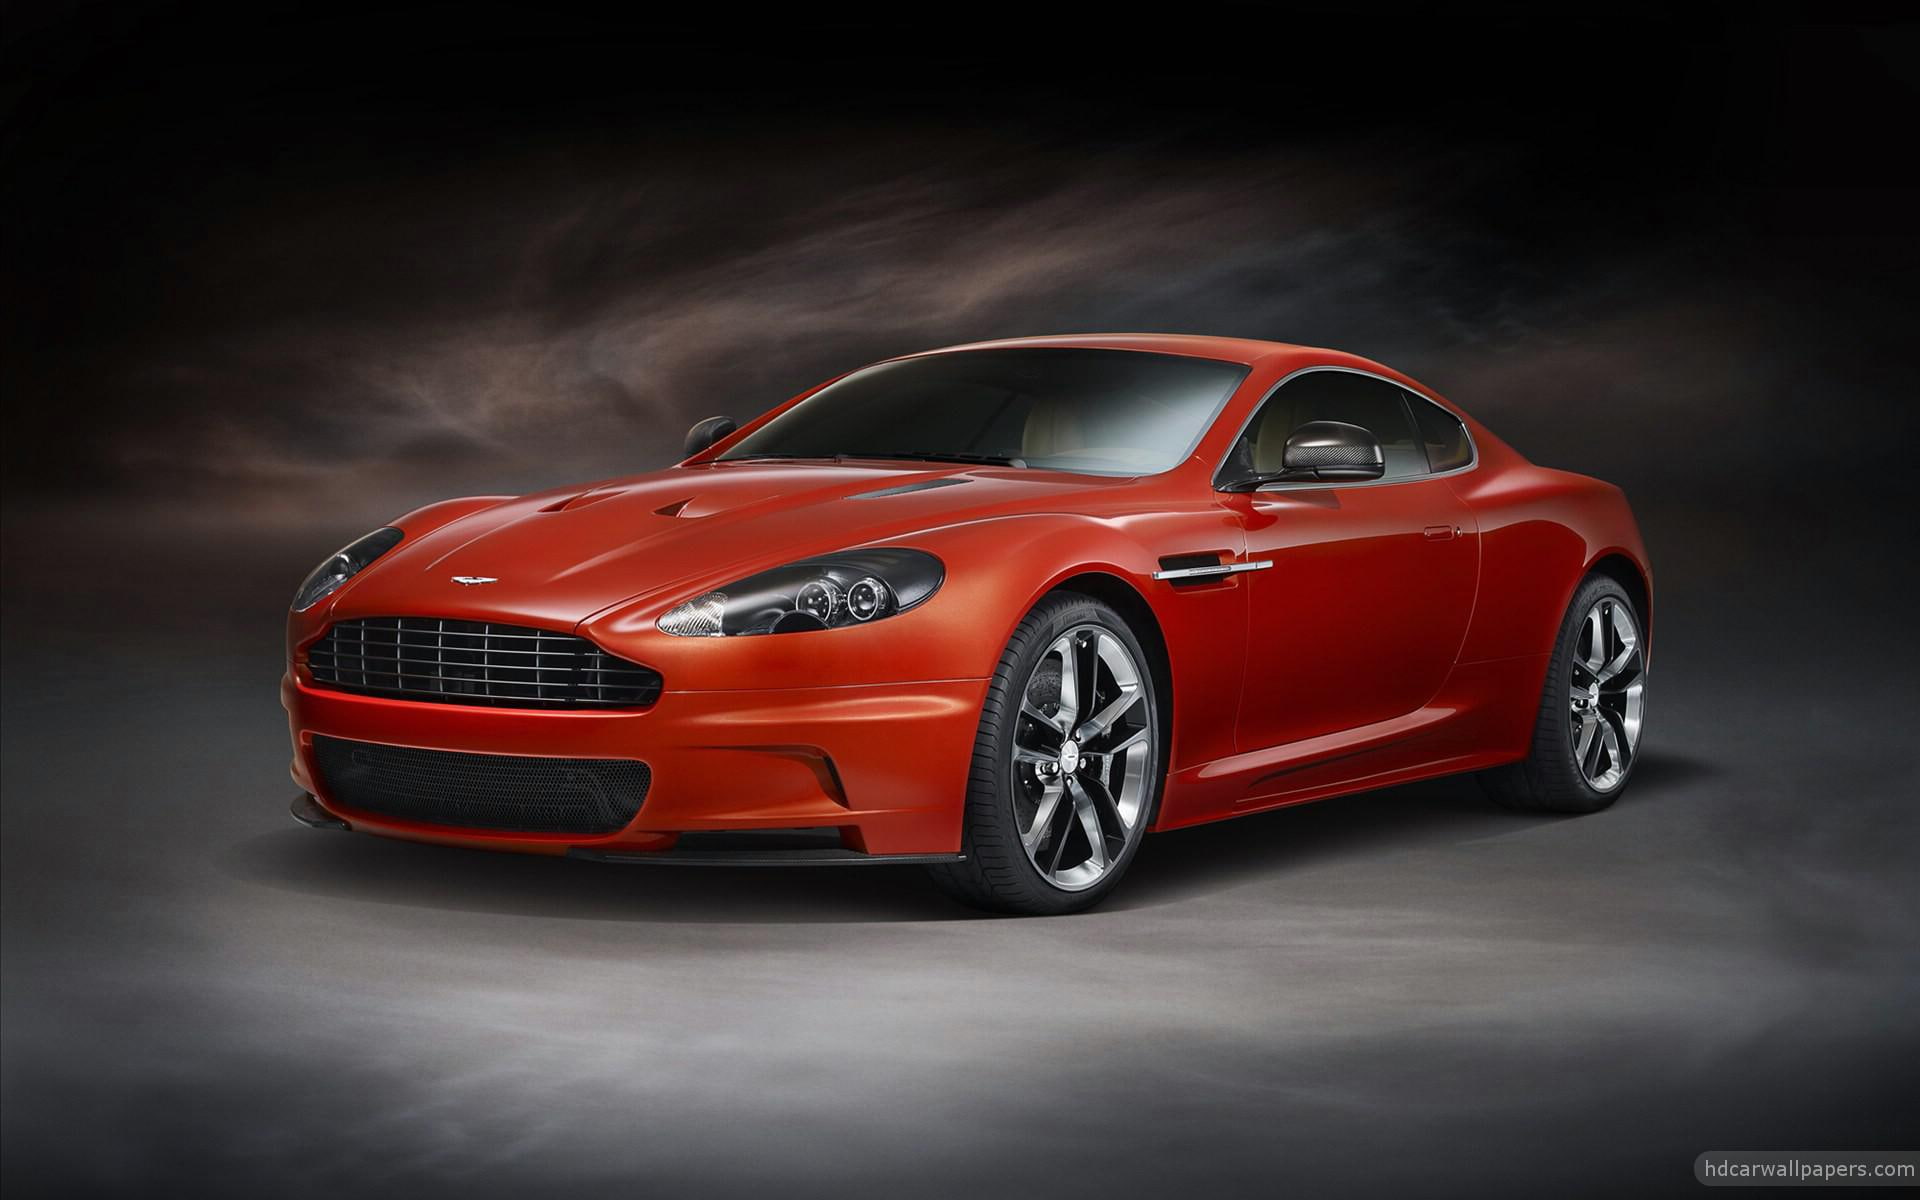 Aston Martin DBS Carbon Edition, red coupe, cars